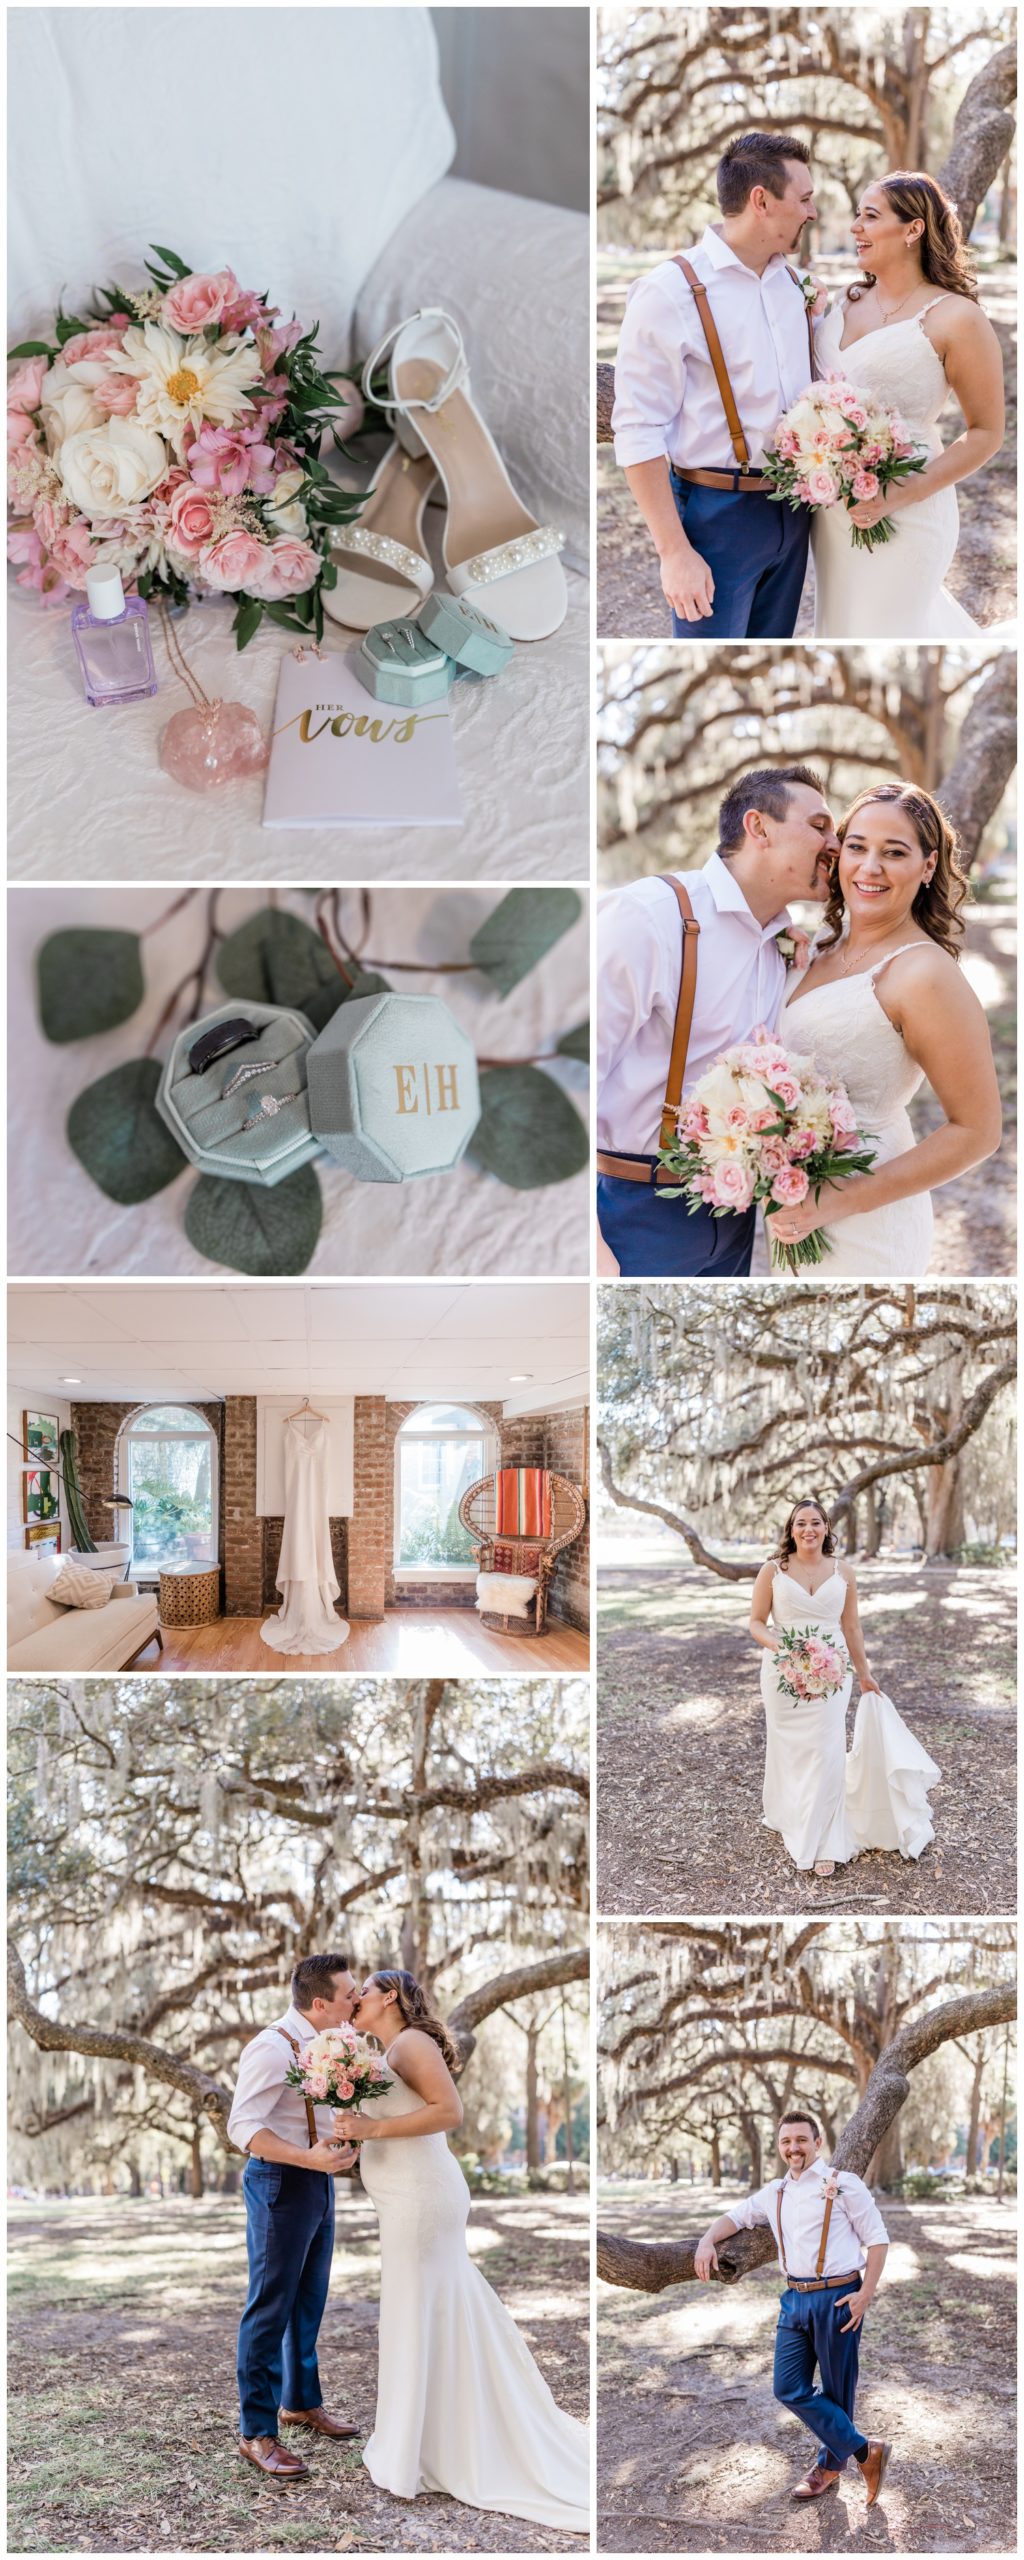 Elopement at Monterey Square. apt b photo, royal makeup and hair, ivory and beau florals